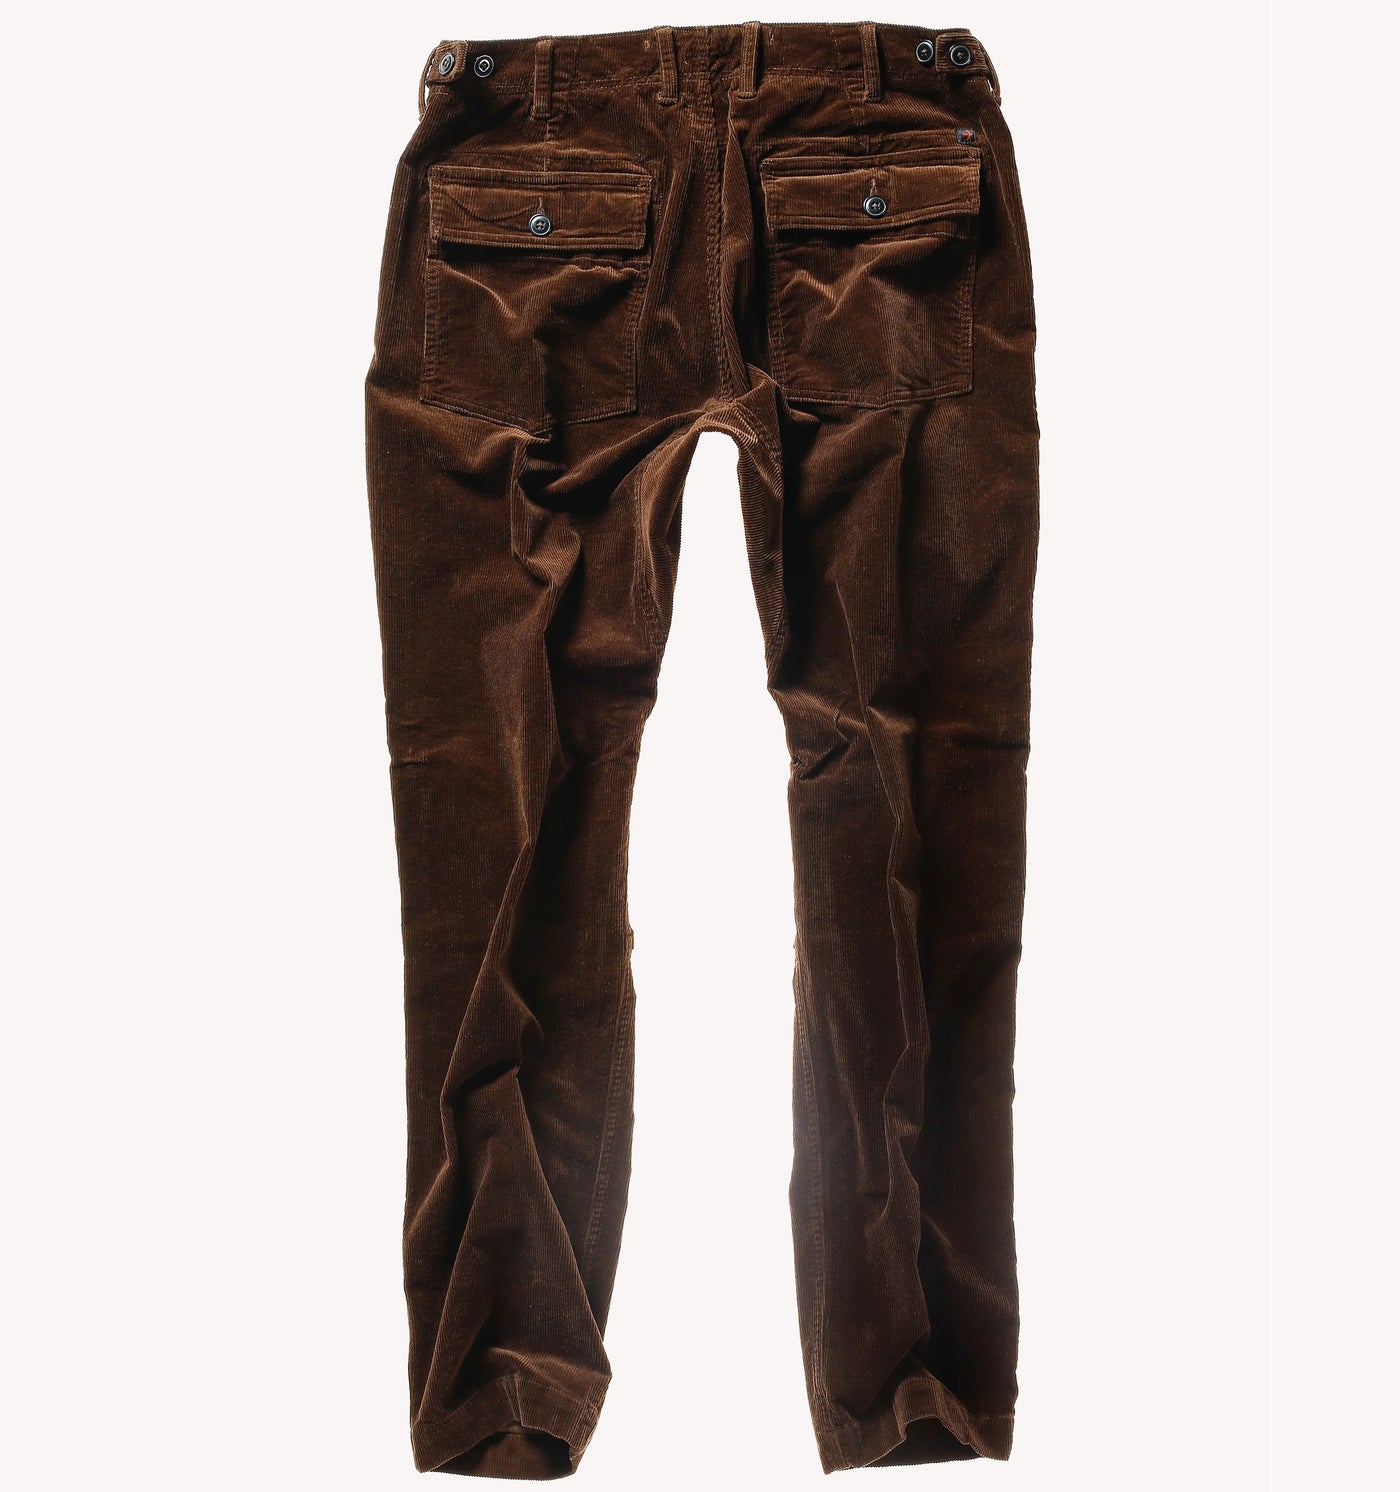 Relwen Cord Supply Sport Pant in Mahogany